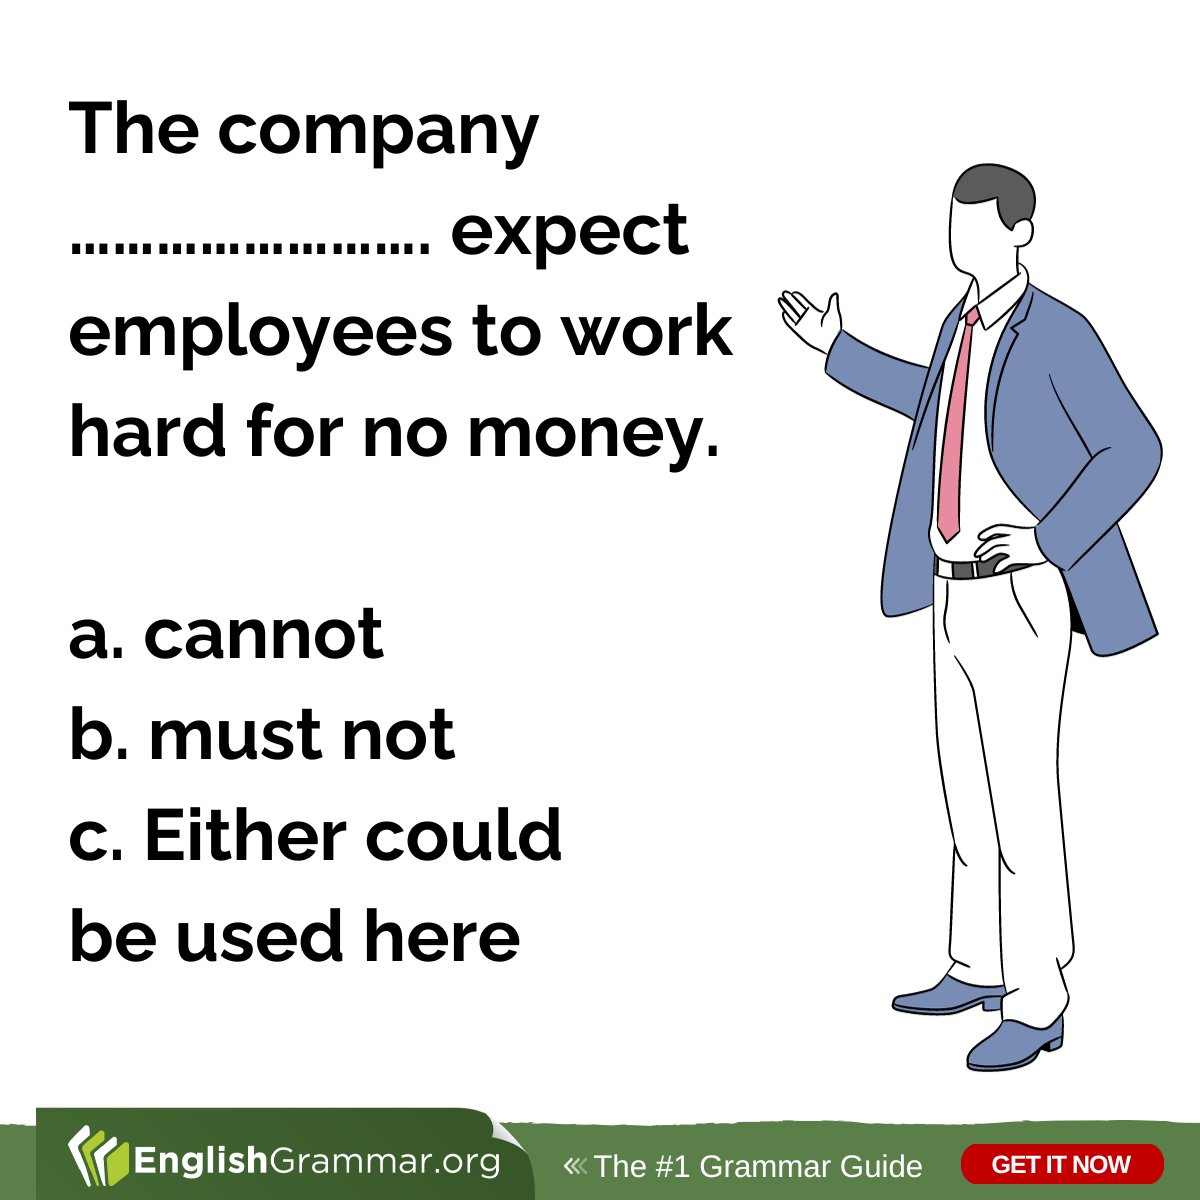 Anyone? Find the right answer here: englishgrammar.org/mixed-grammar-… #Englishgrammar #grammar #writing